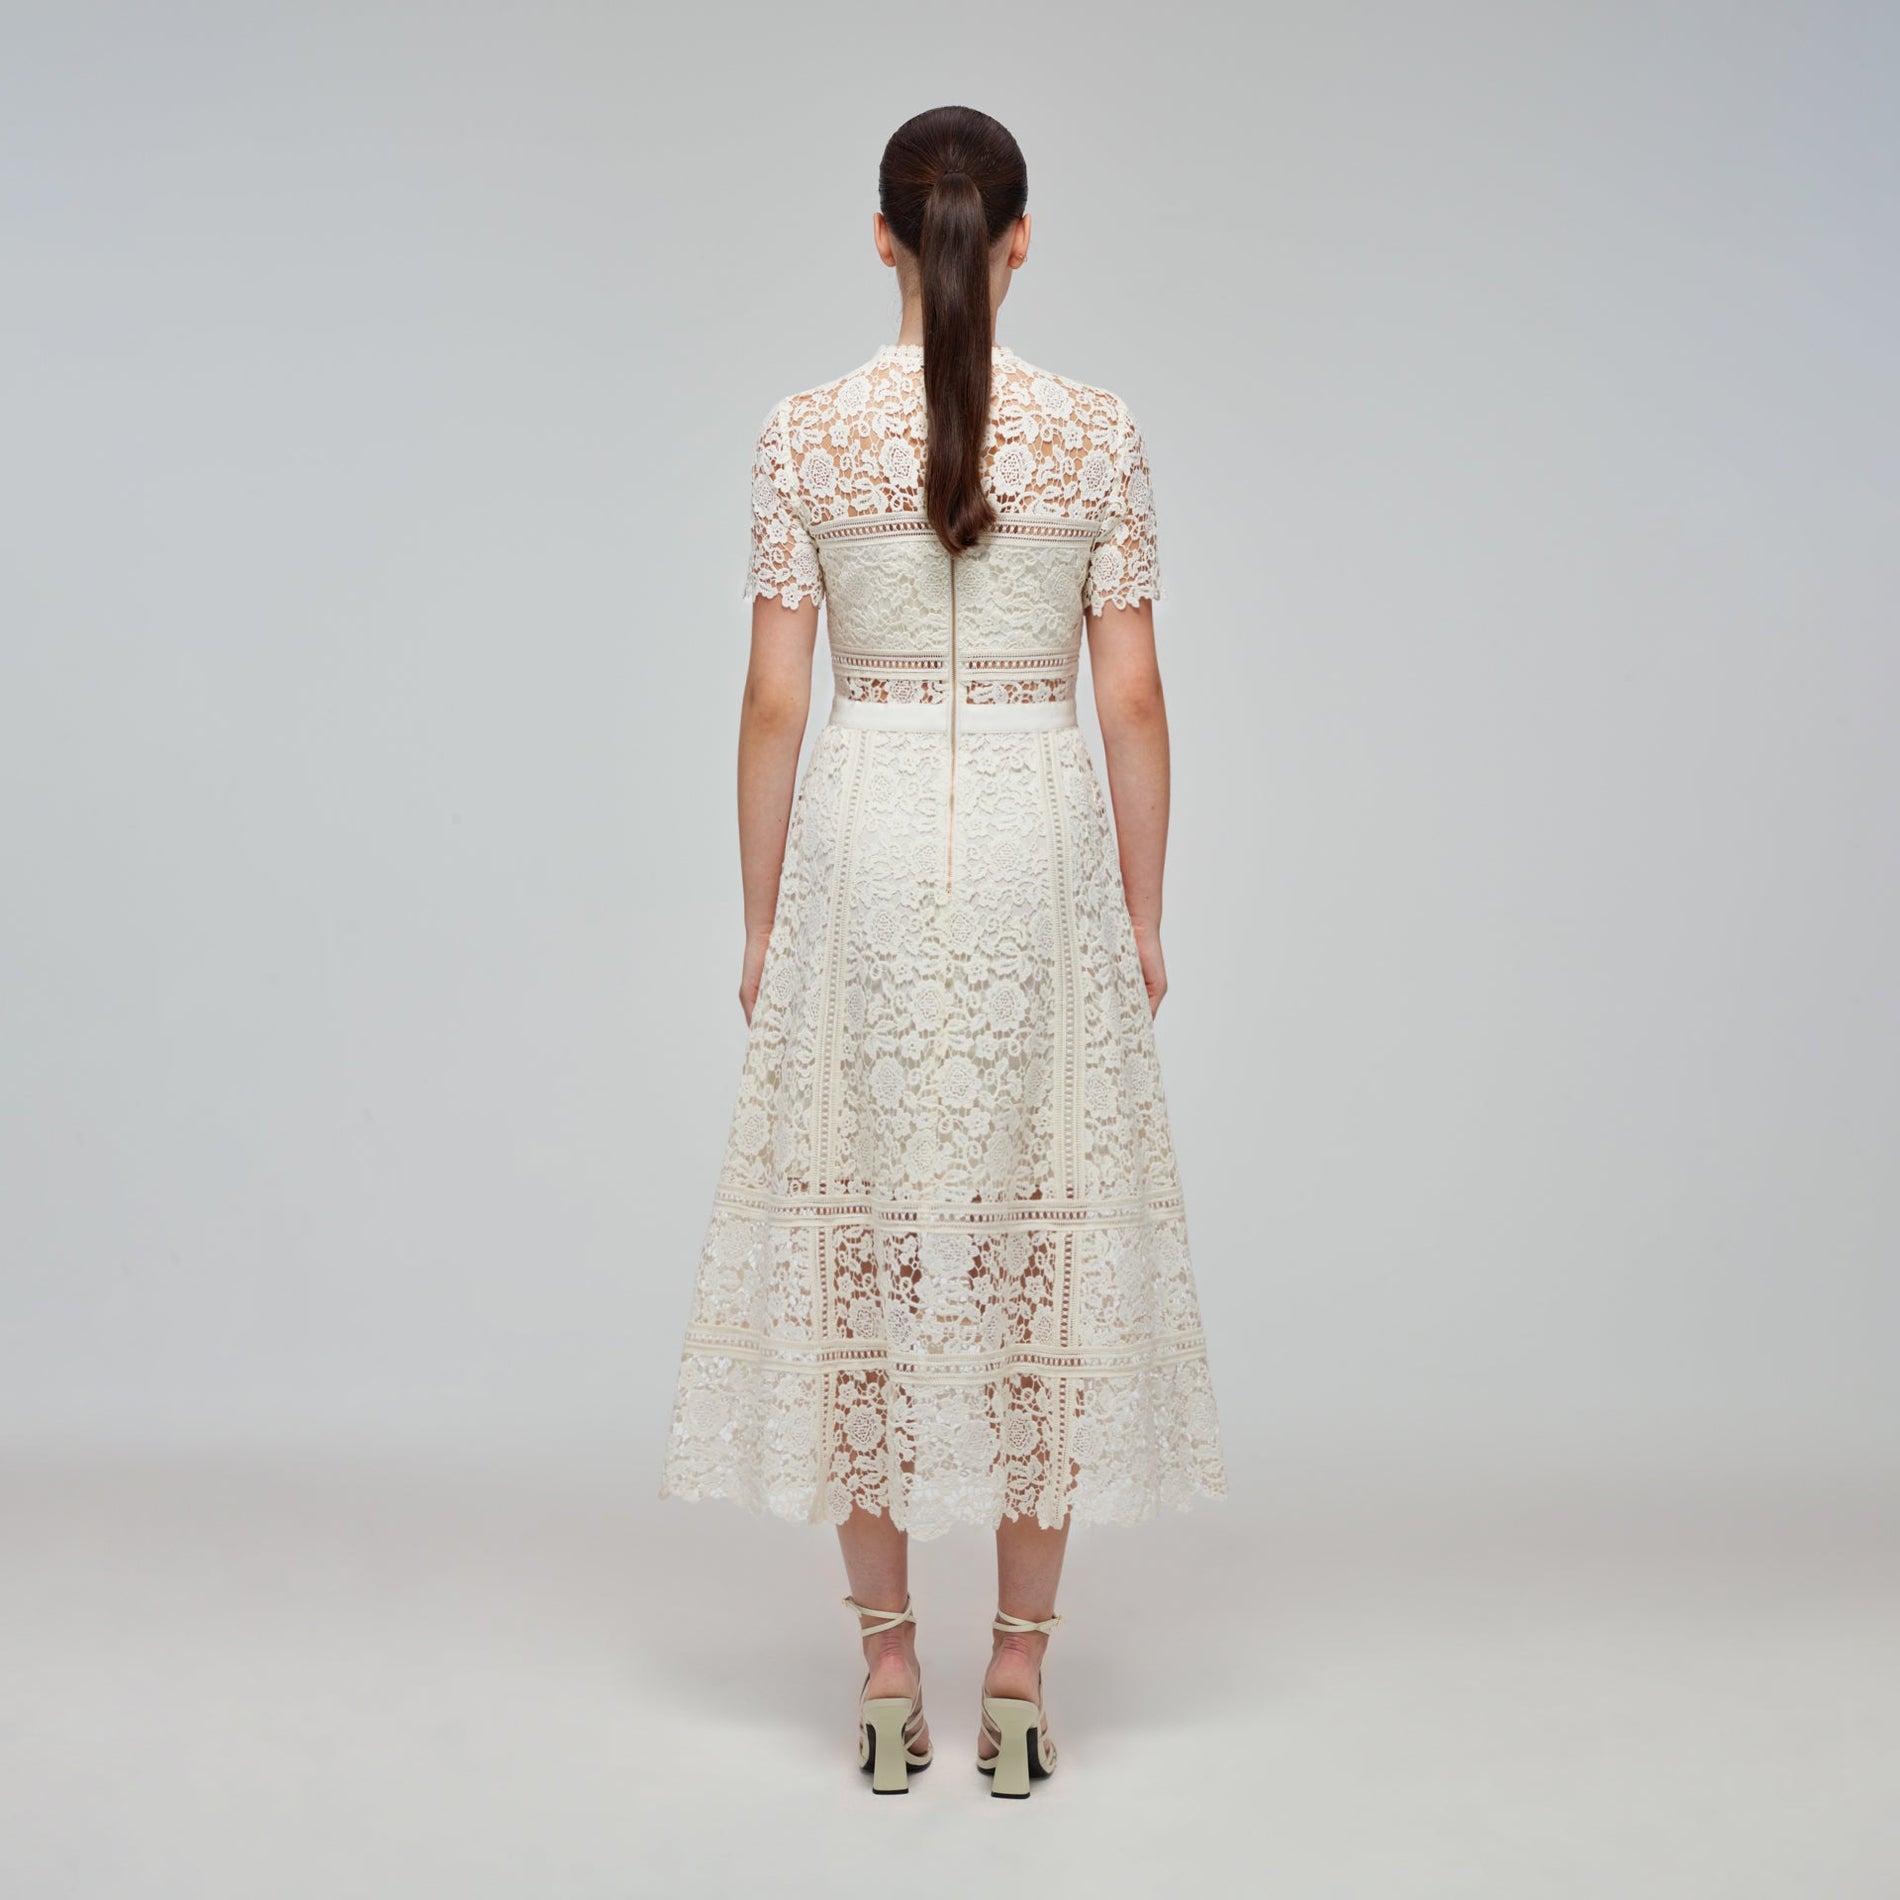 A woman wearing the Ivory Floral Guipure Midi Dress